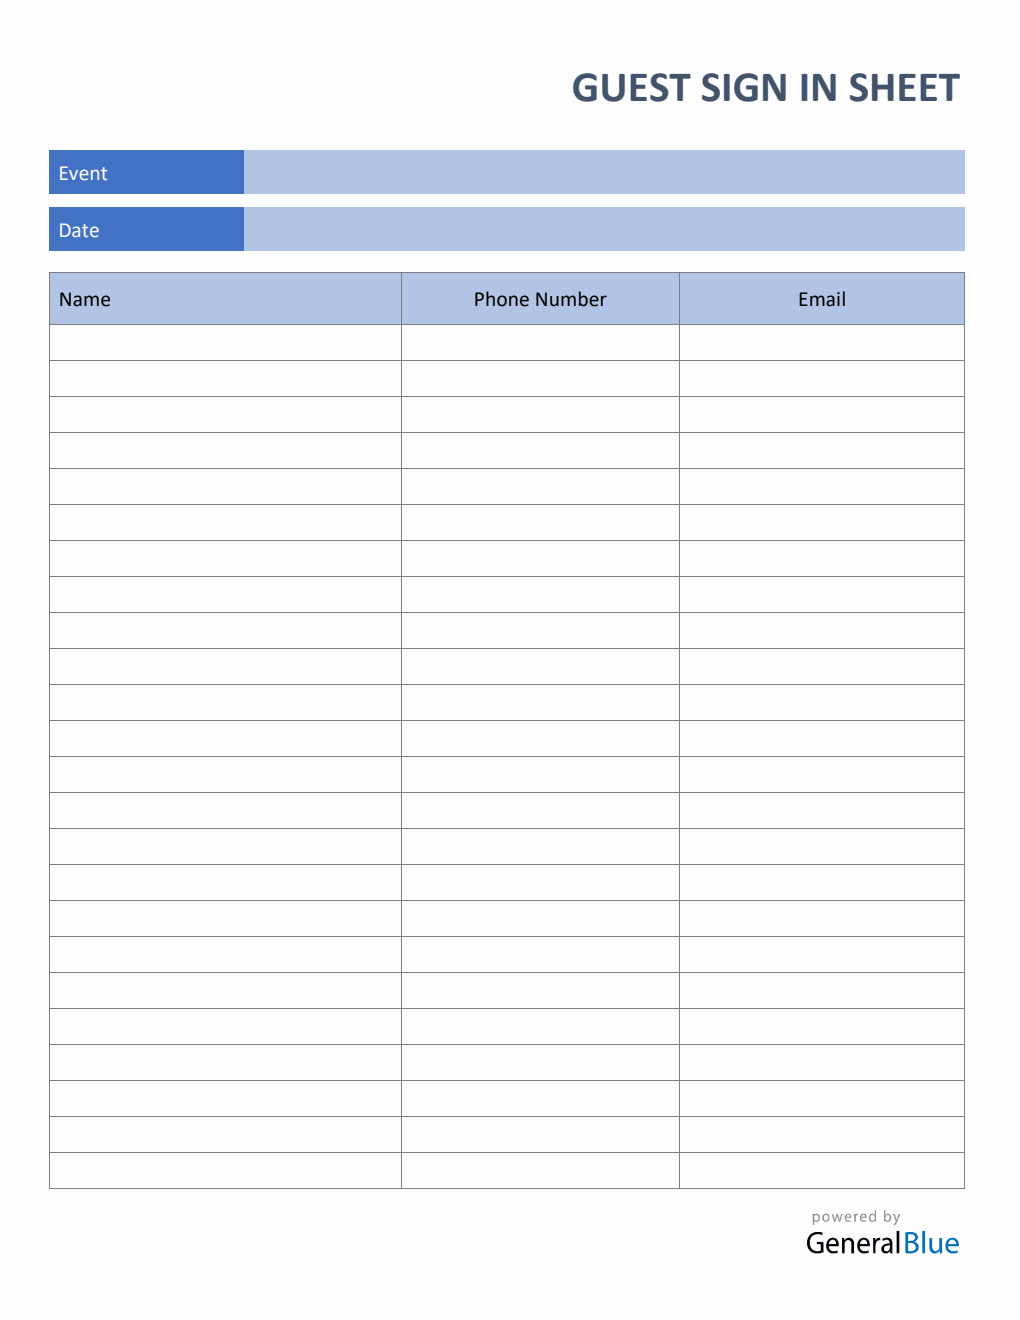 Guest Sign In Sheet in Word